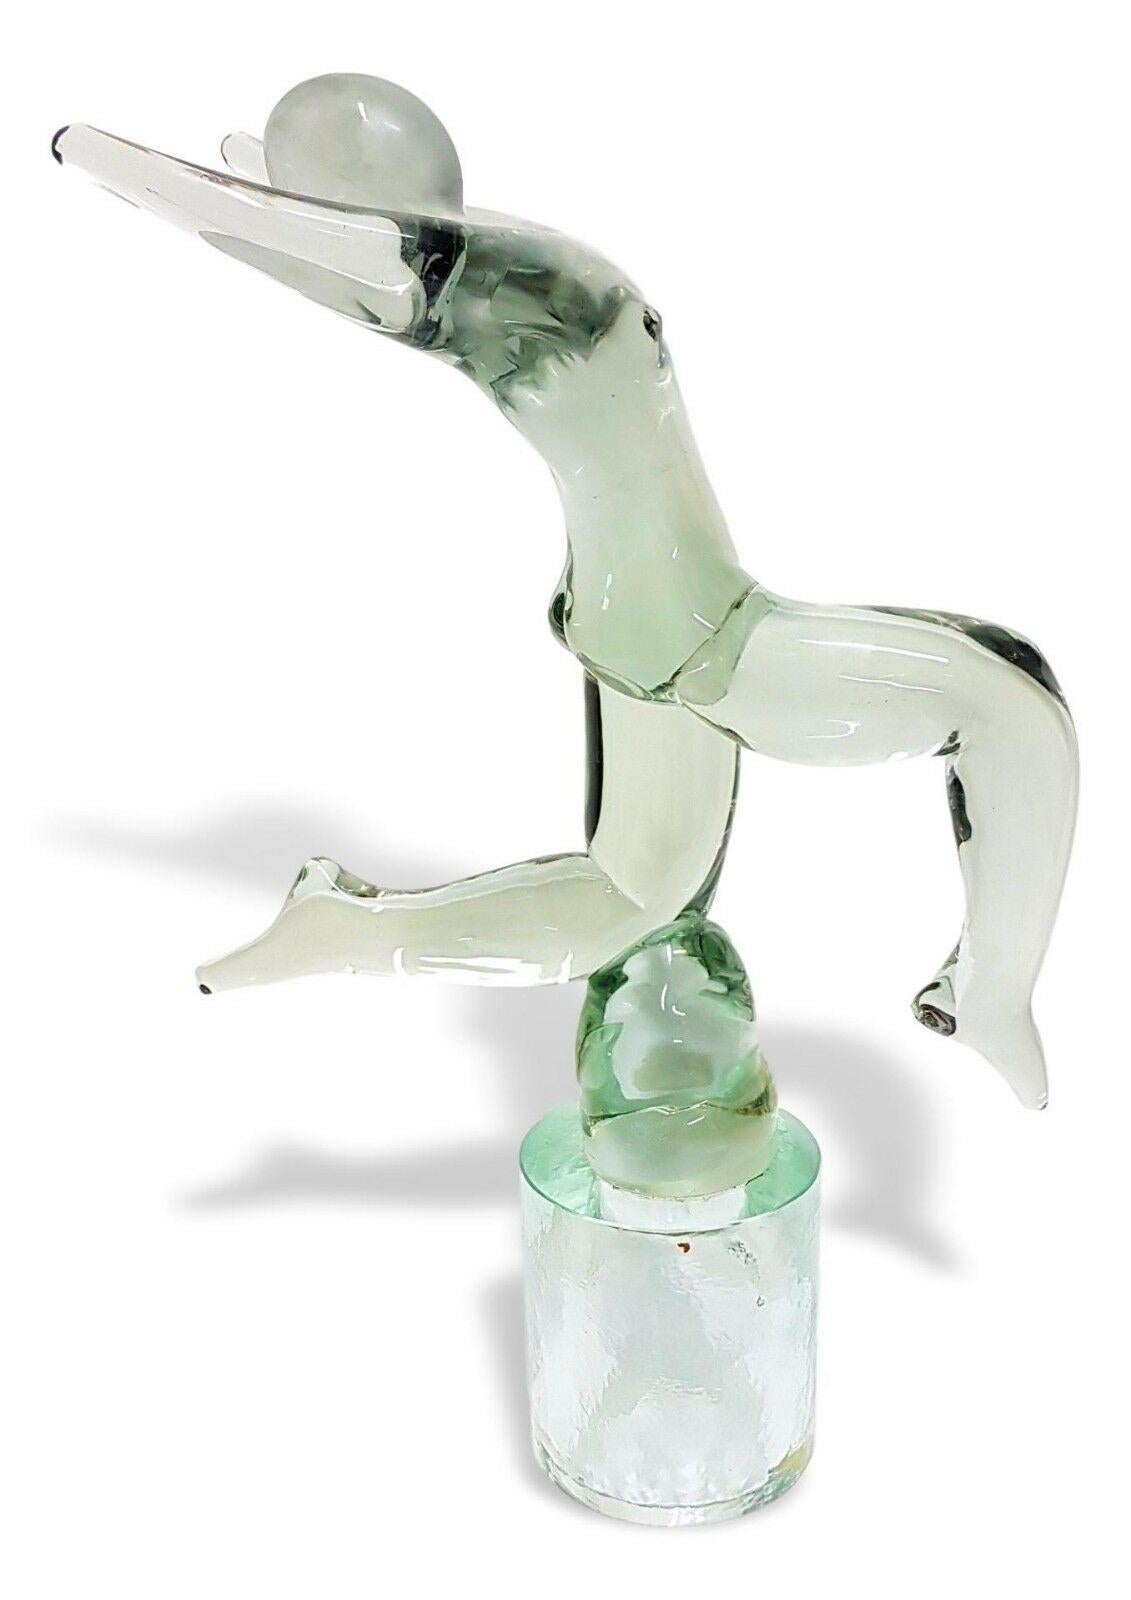 Wonderful Murano glass sculpture from the 70s designed by Renato Anatrà for Venier, depicting an athlete

It measures 45 cm in height by 30 cm in width, in perfect storage conditions, signed under the base.